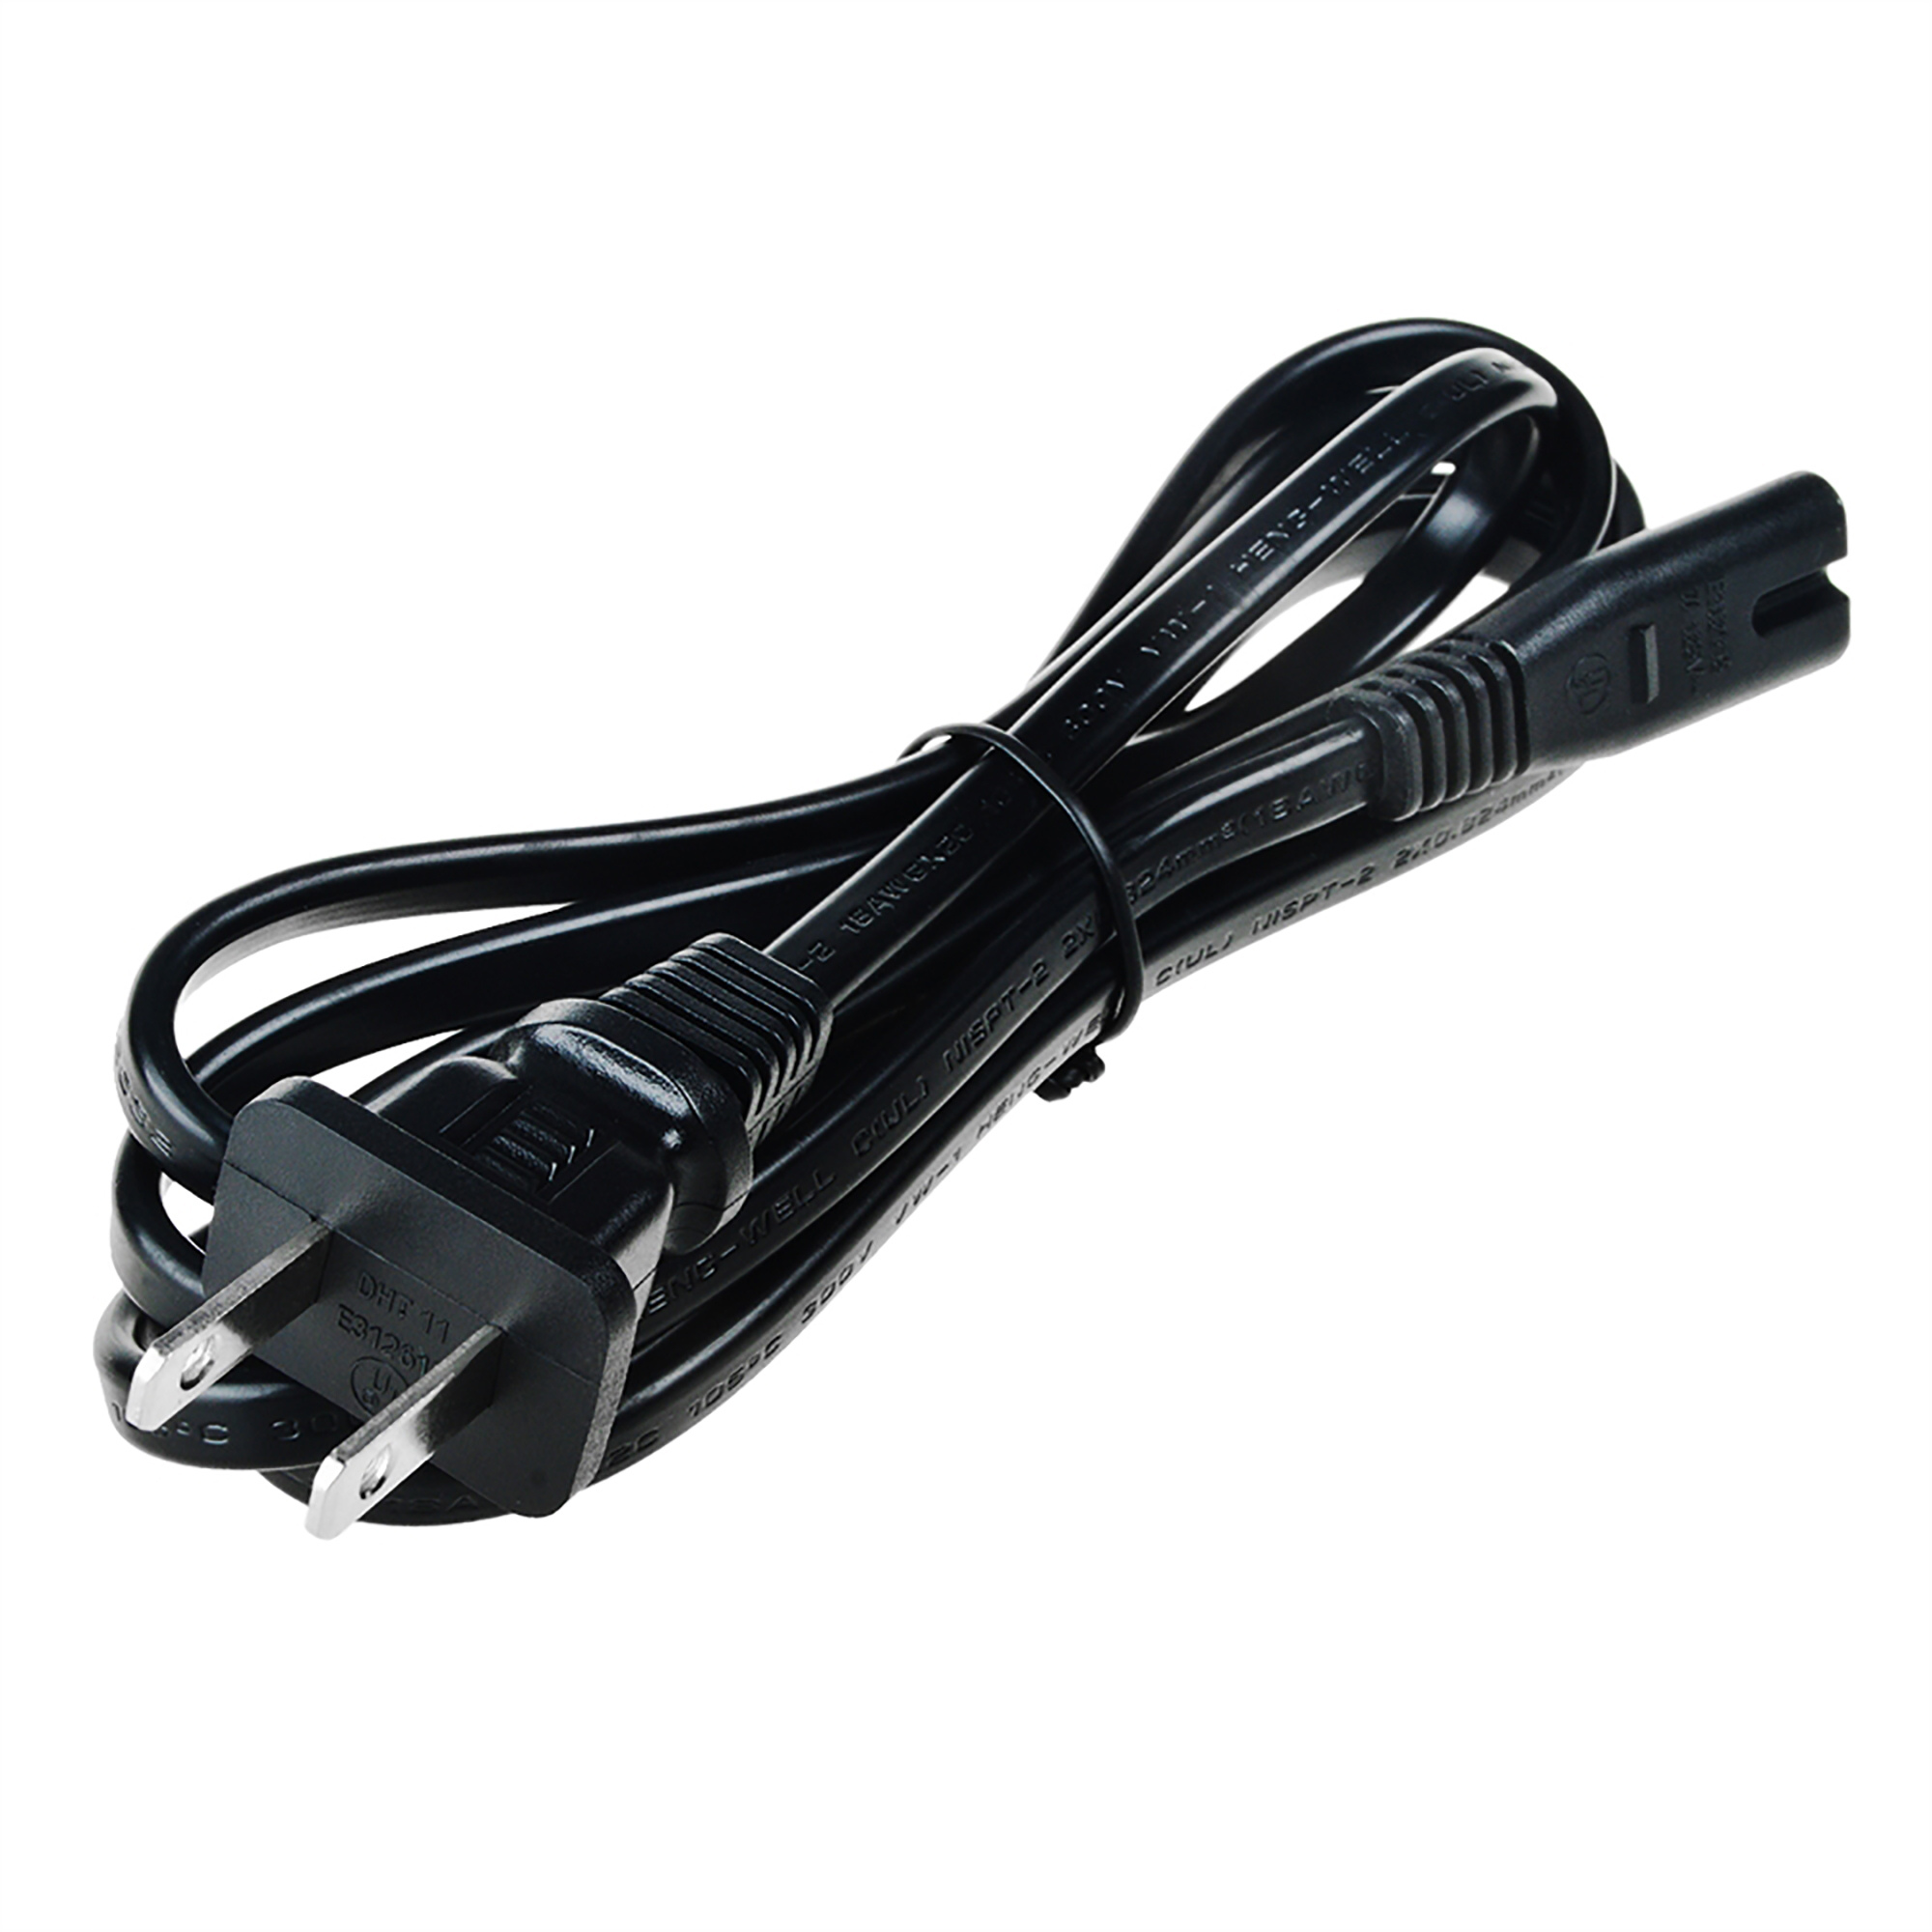 PKPOWER AC Power Cord for Monster BTW249 40W High Performance In/Outdoor Speaker - image 2 of 3